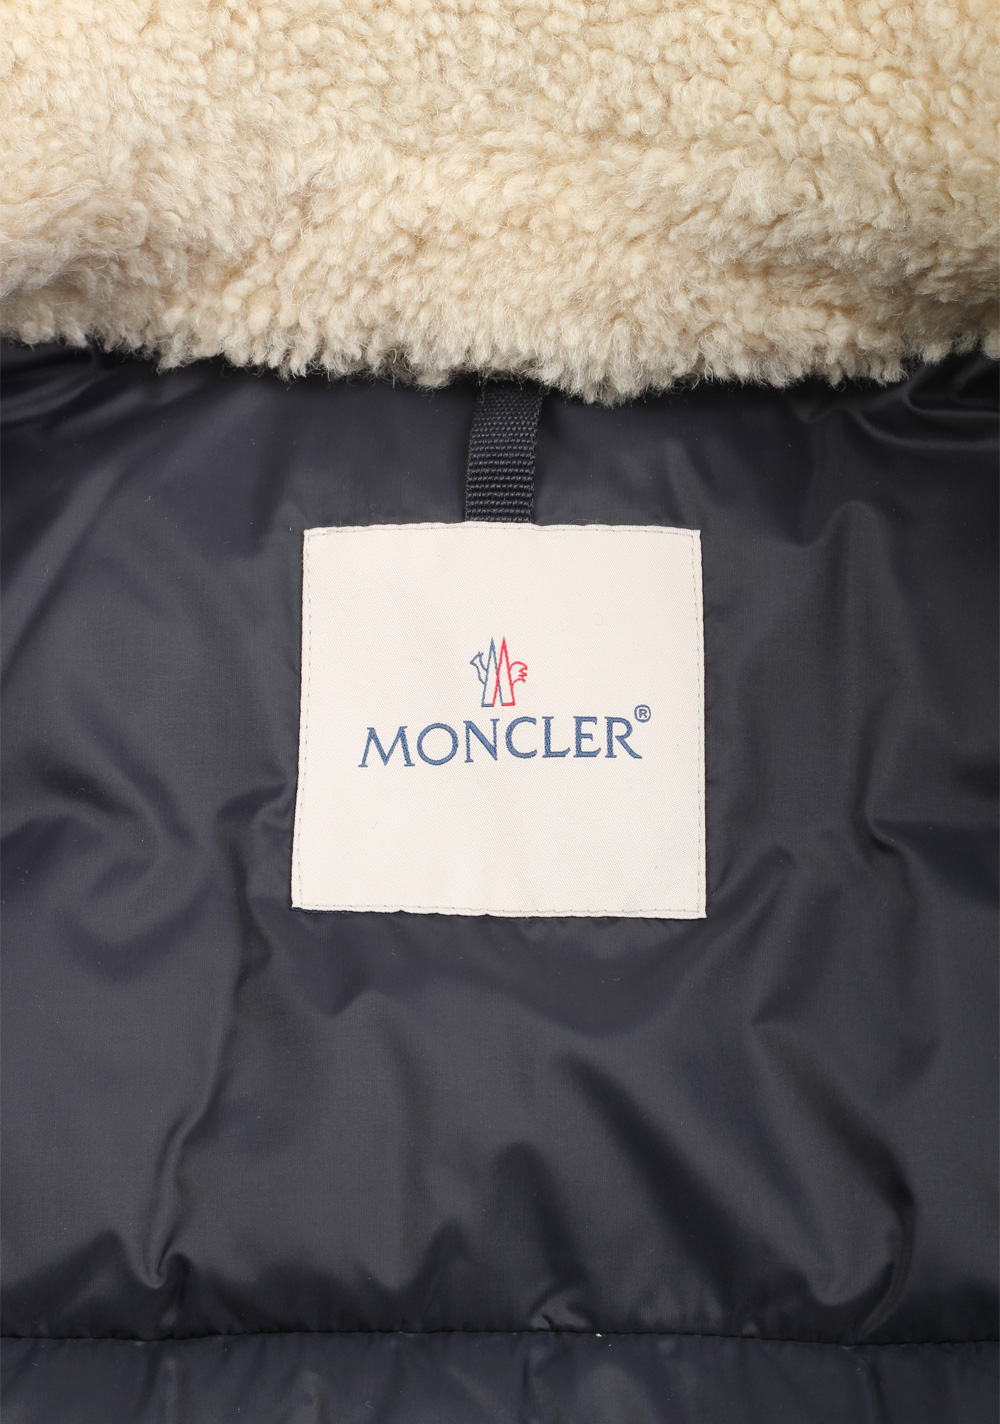 moncler size 2 in us